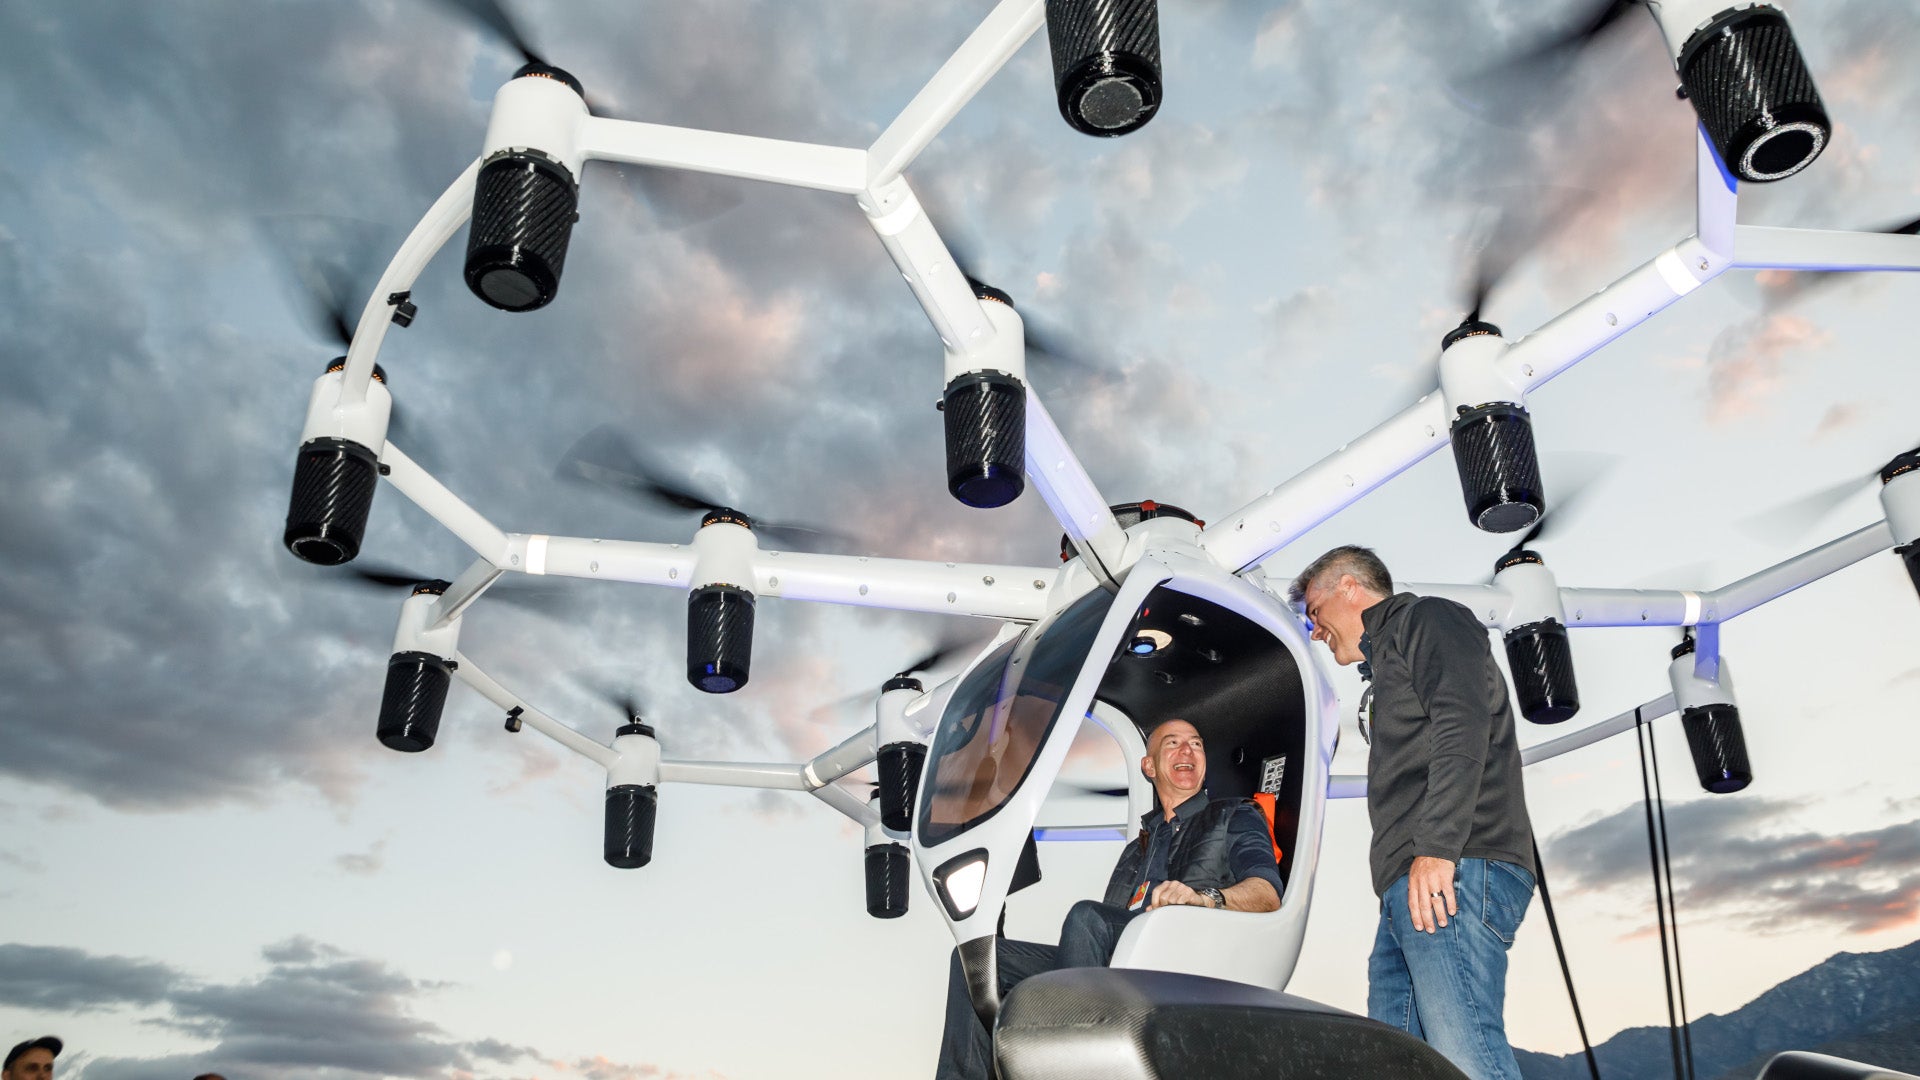 Floridians Can Now Fly This Personal Electric Aircraft Without Pilot Certification